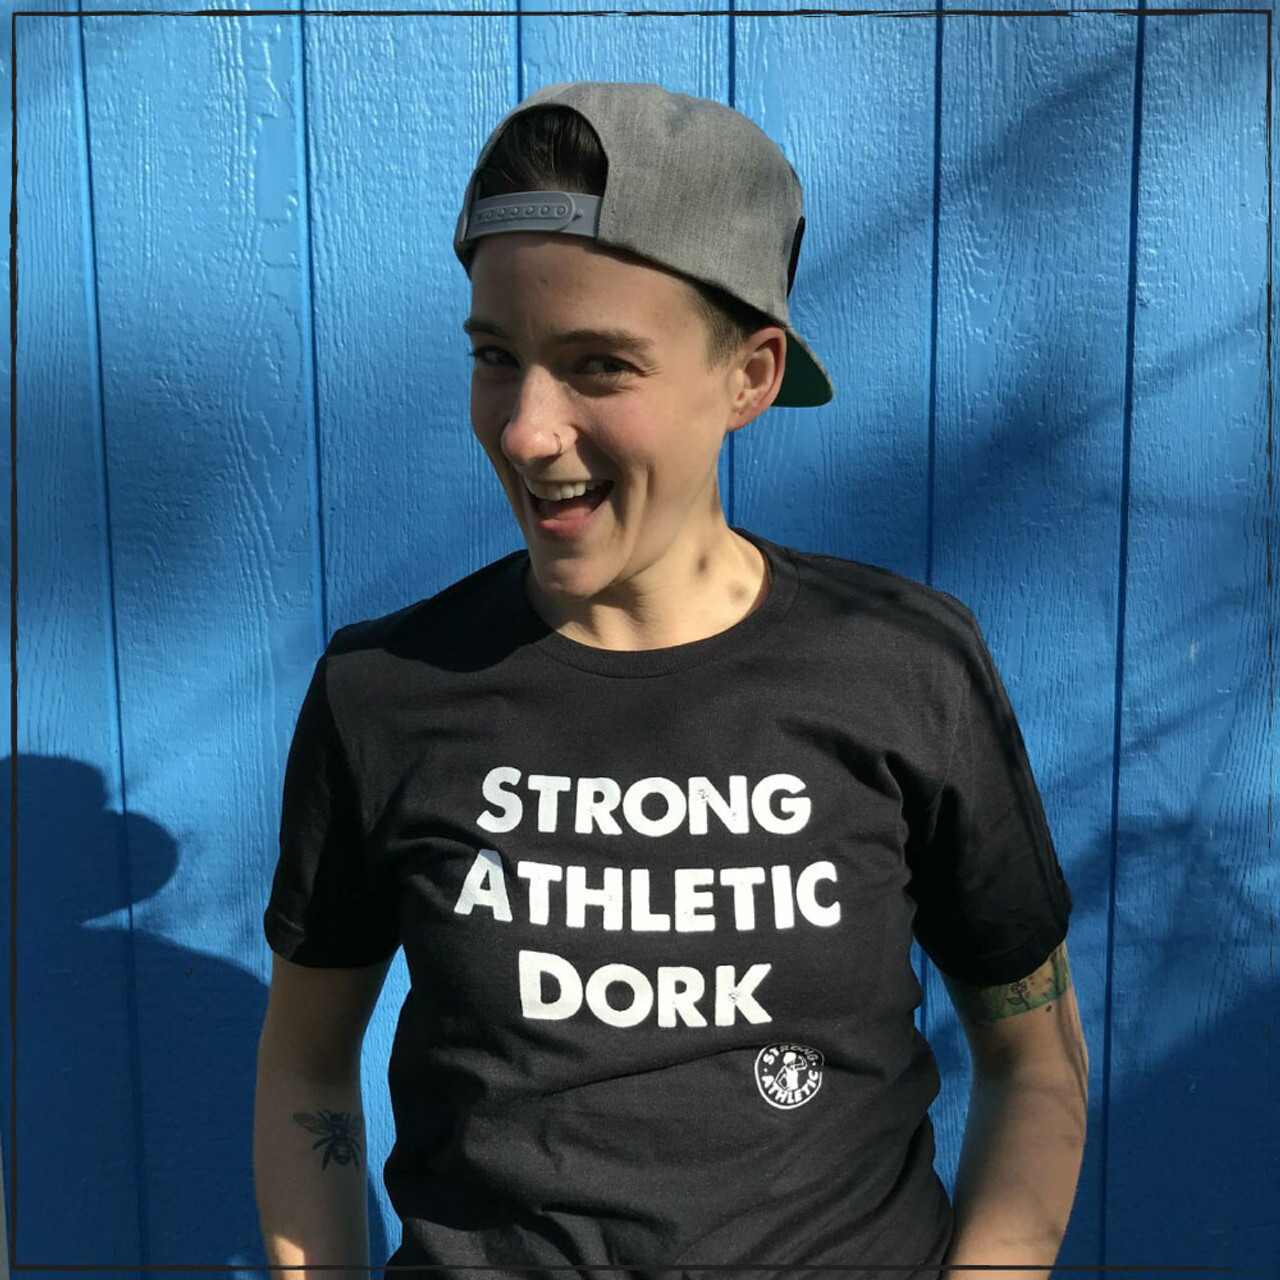 Tees for Dorks: the Strong Athletic Dork Crew Neck T-Shirts are Sold Out!